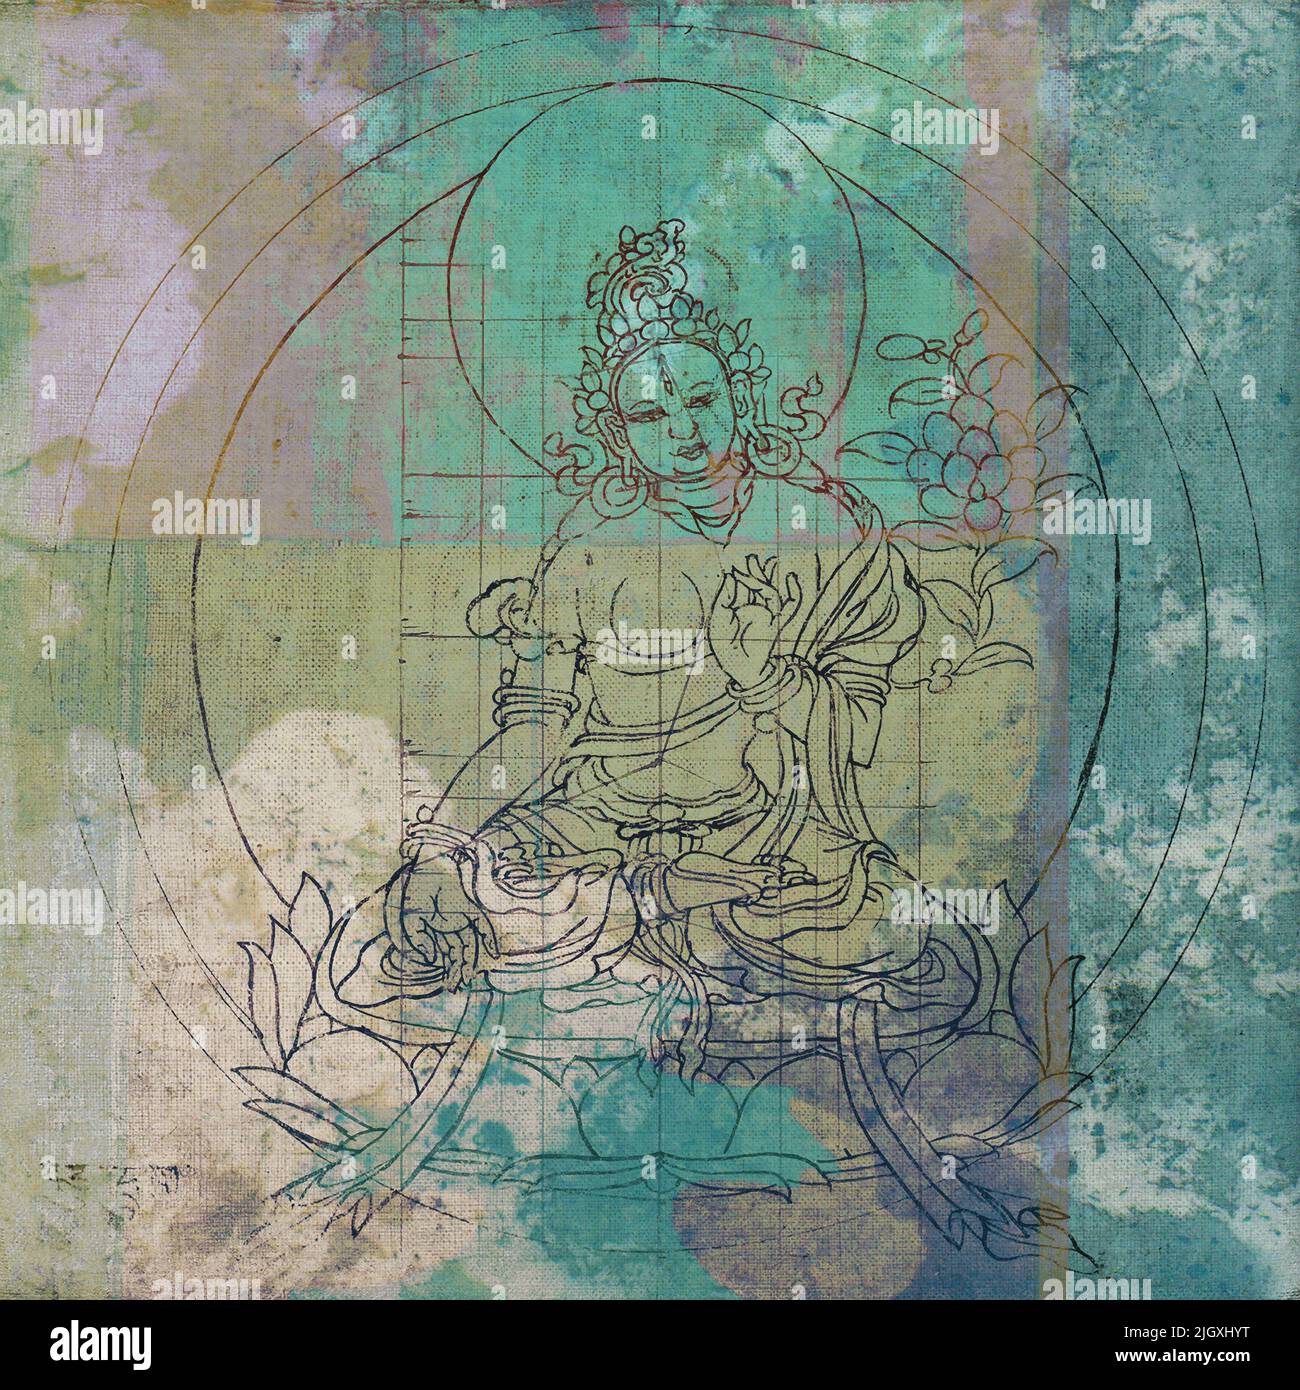 Antique grunge buddha illustrations with abstract colors and textures. Stock Photo